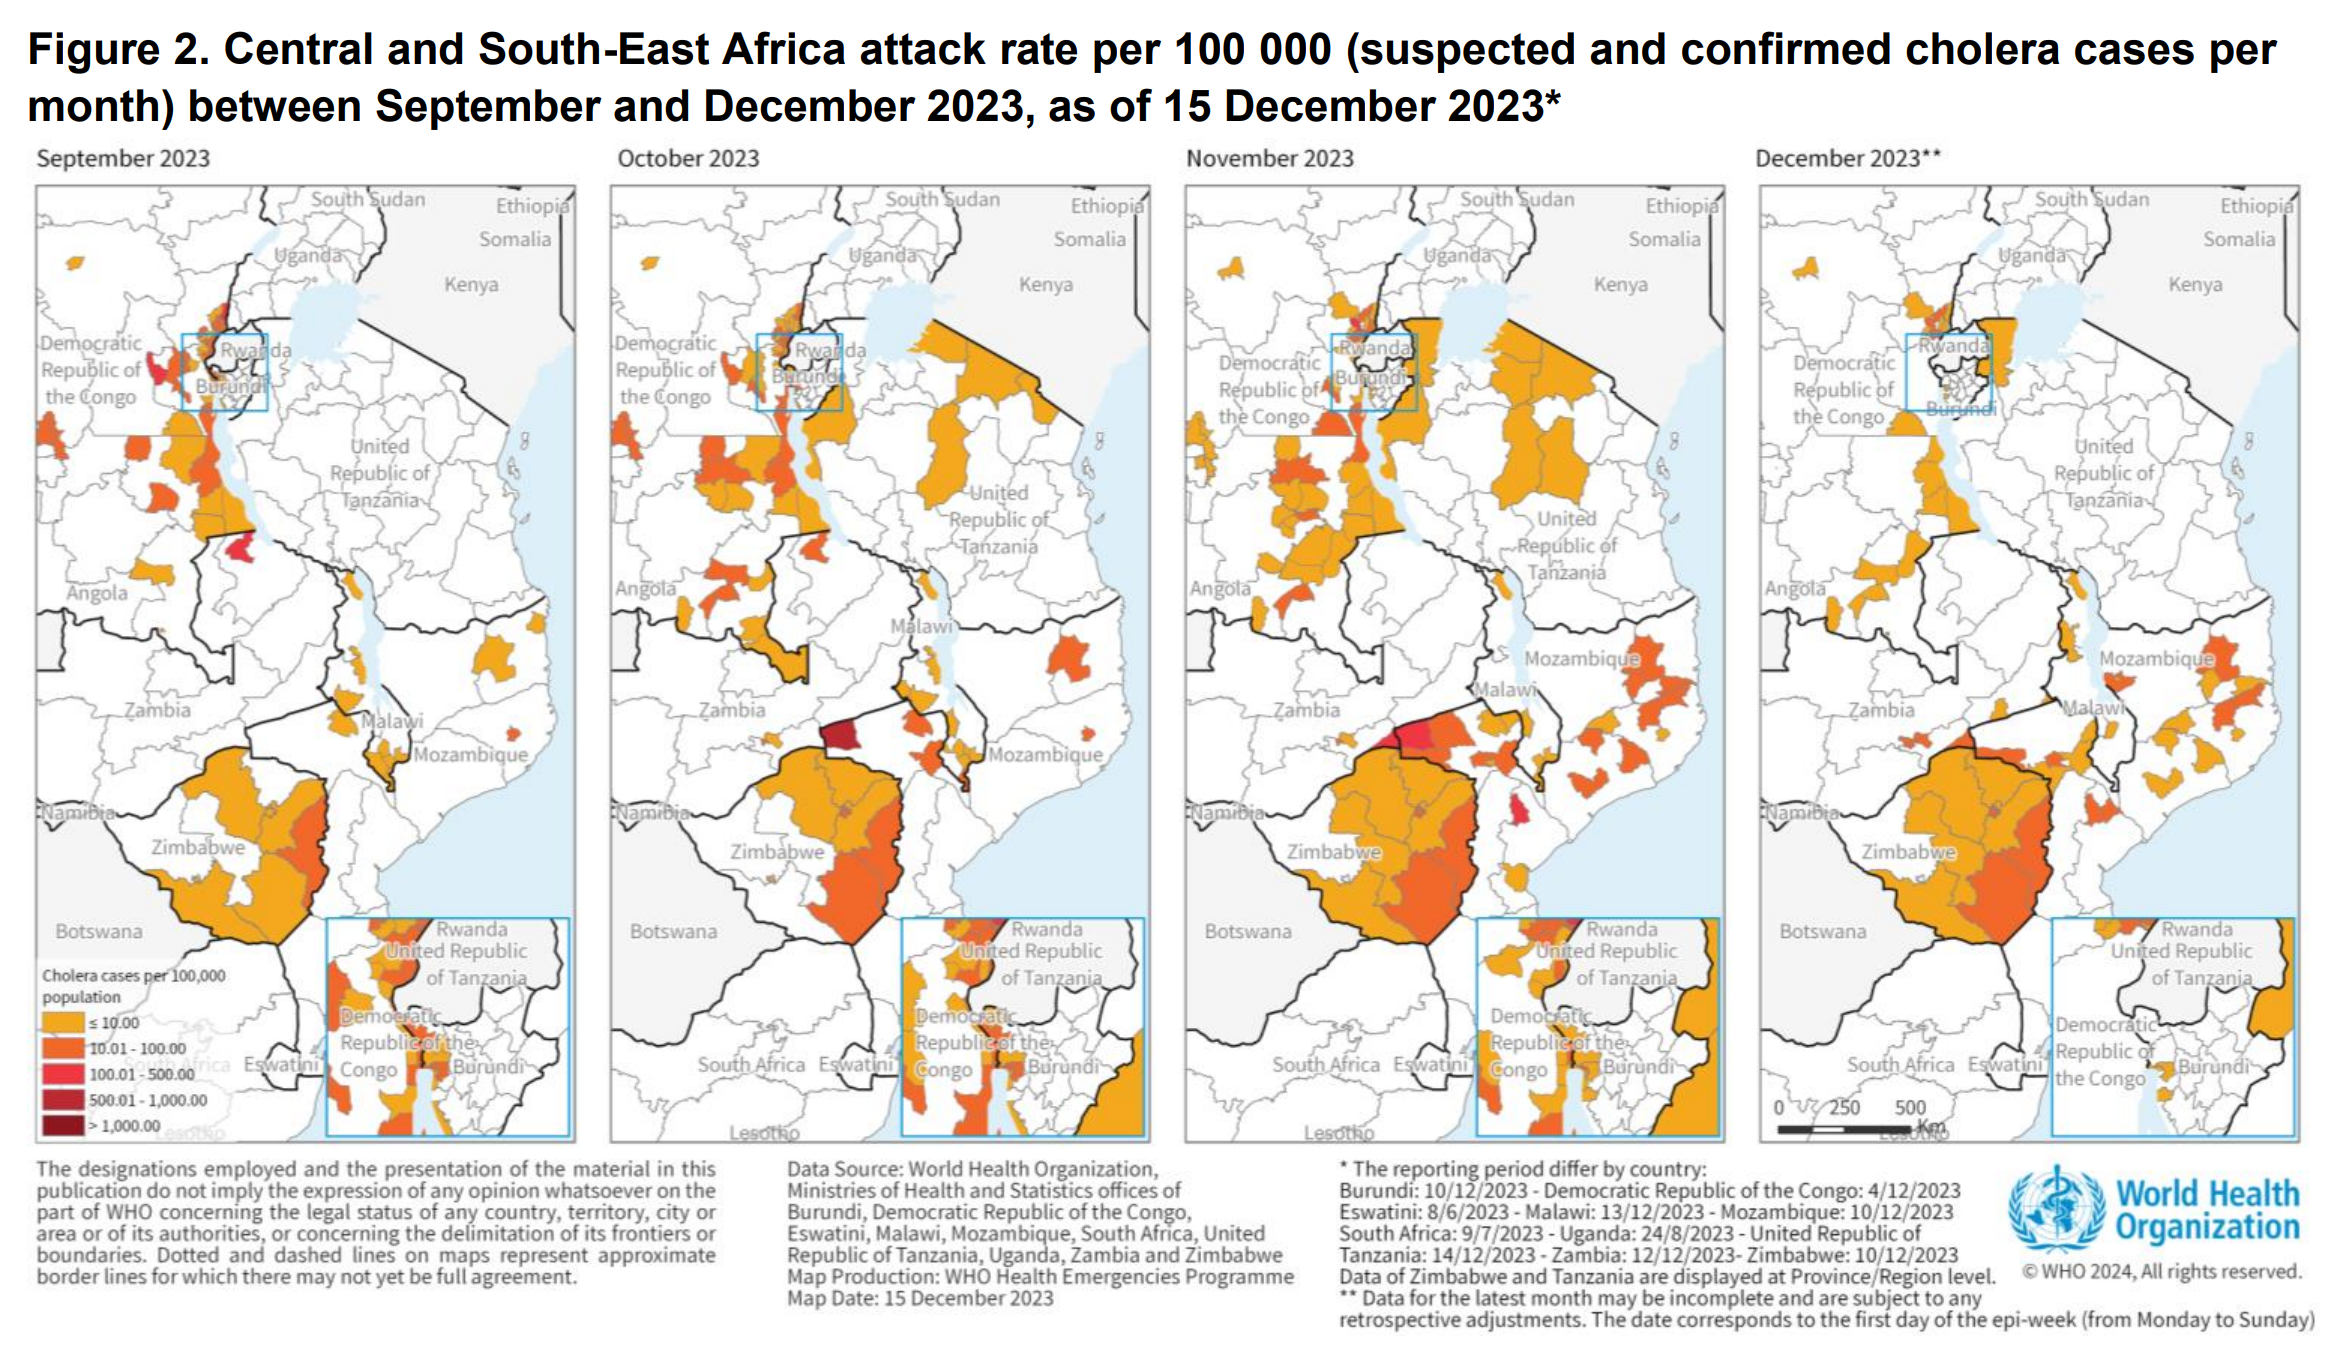 Maps showing Central and South-East Africa cholera attack rate per 100,000 people (suspected and confirmed cases per month) between September and December 2023, as of 15 December 2023. Graphic: WHO